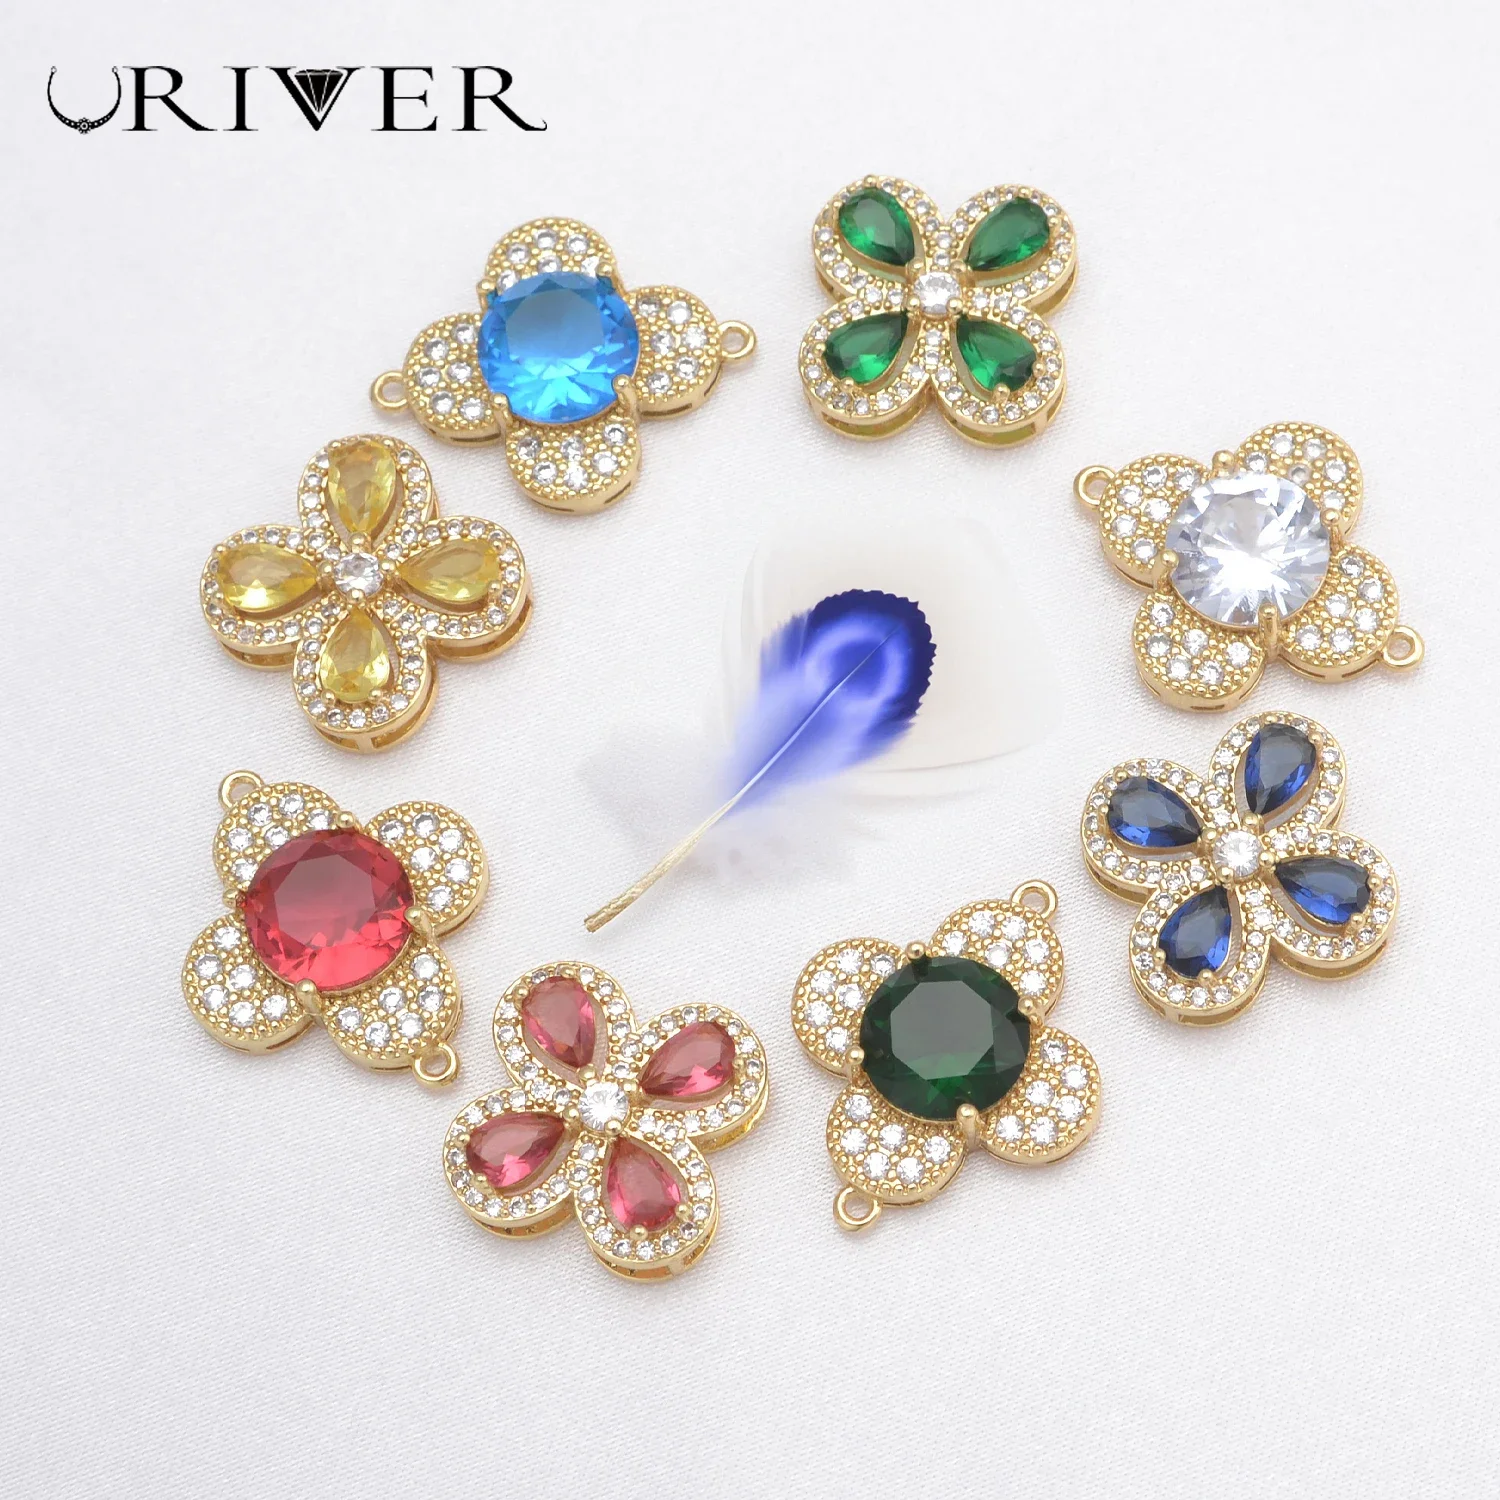 

LJRIVER Zircon Connector for DIY Jewelry Making Materials Connection Fasteners Petal-shaped Metal Buckle Handmade Accessories